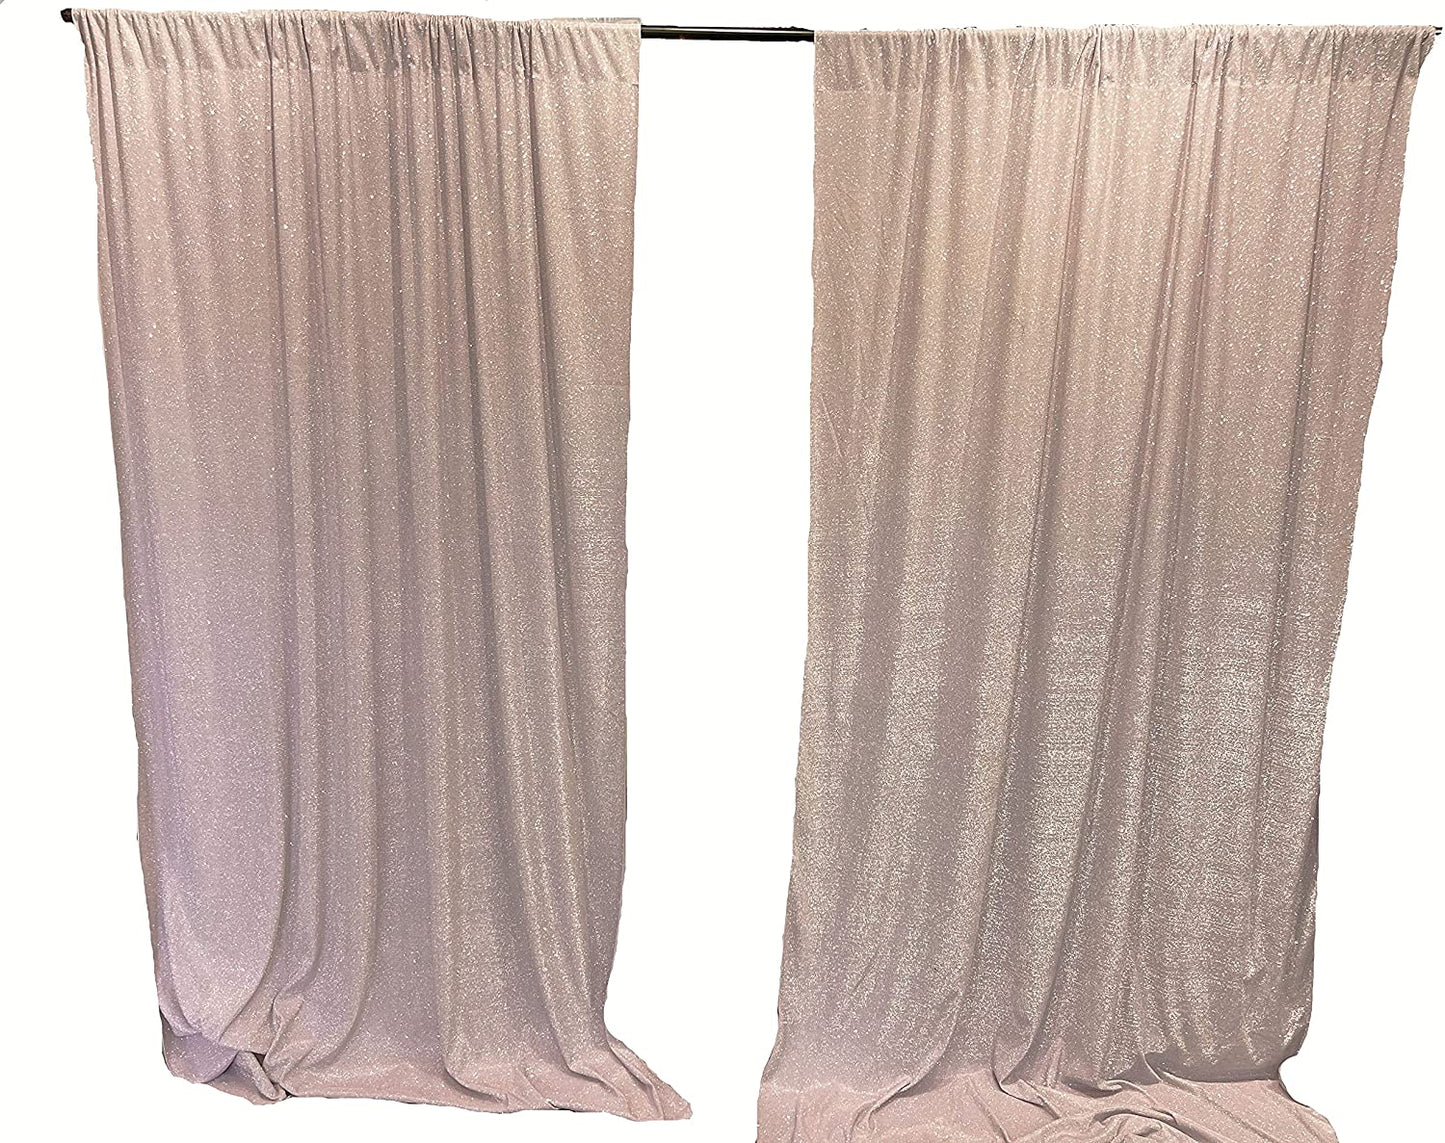 Full Covered Glitter Shimmer on Fabric Backdrop Drape - Curtain - Wedding Party Decoration (2 Panels Blush